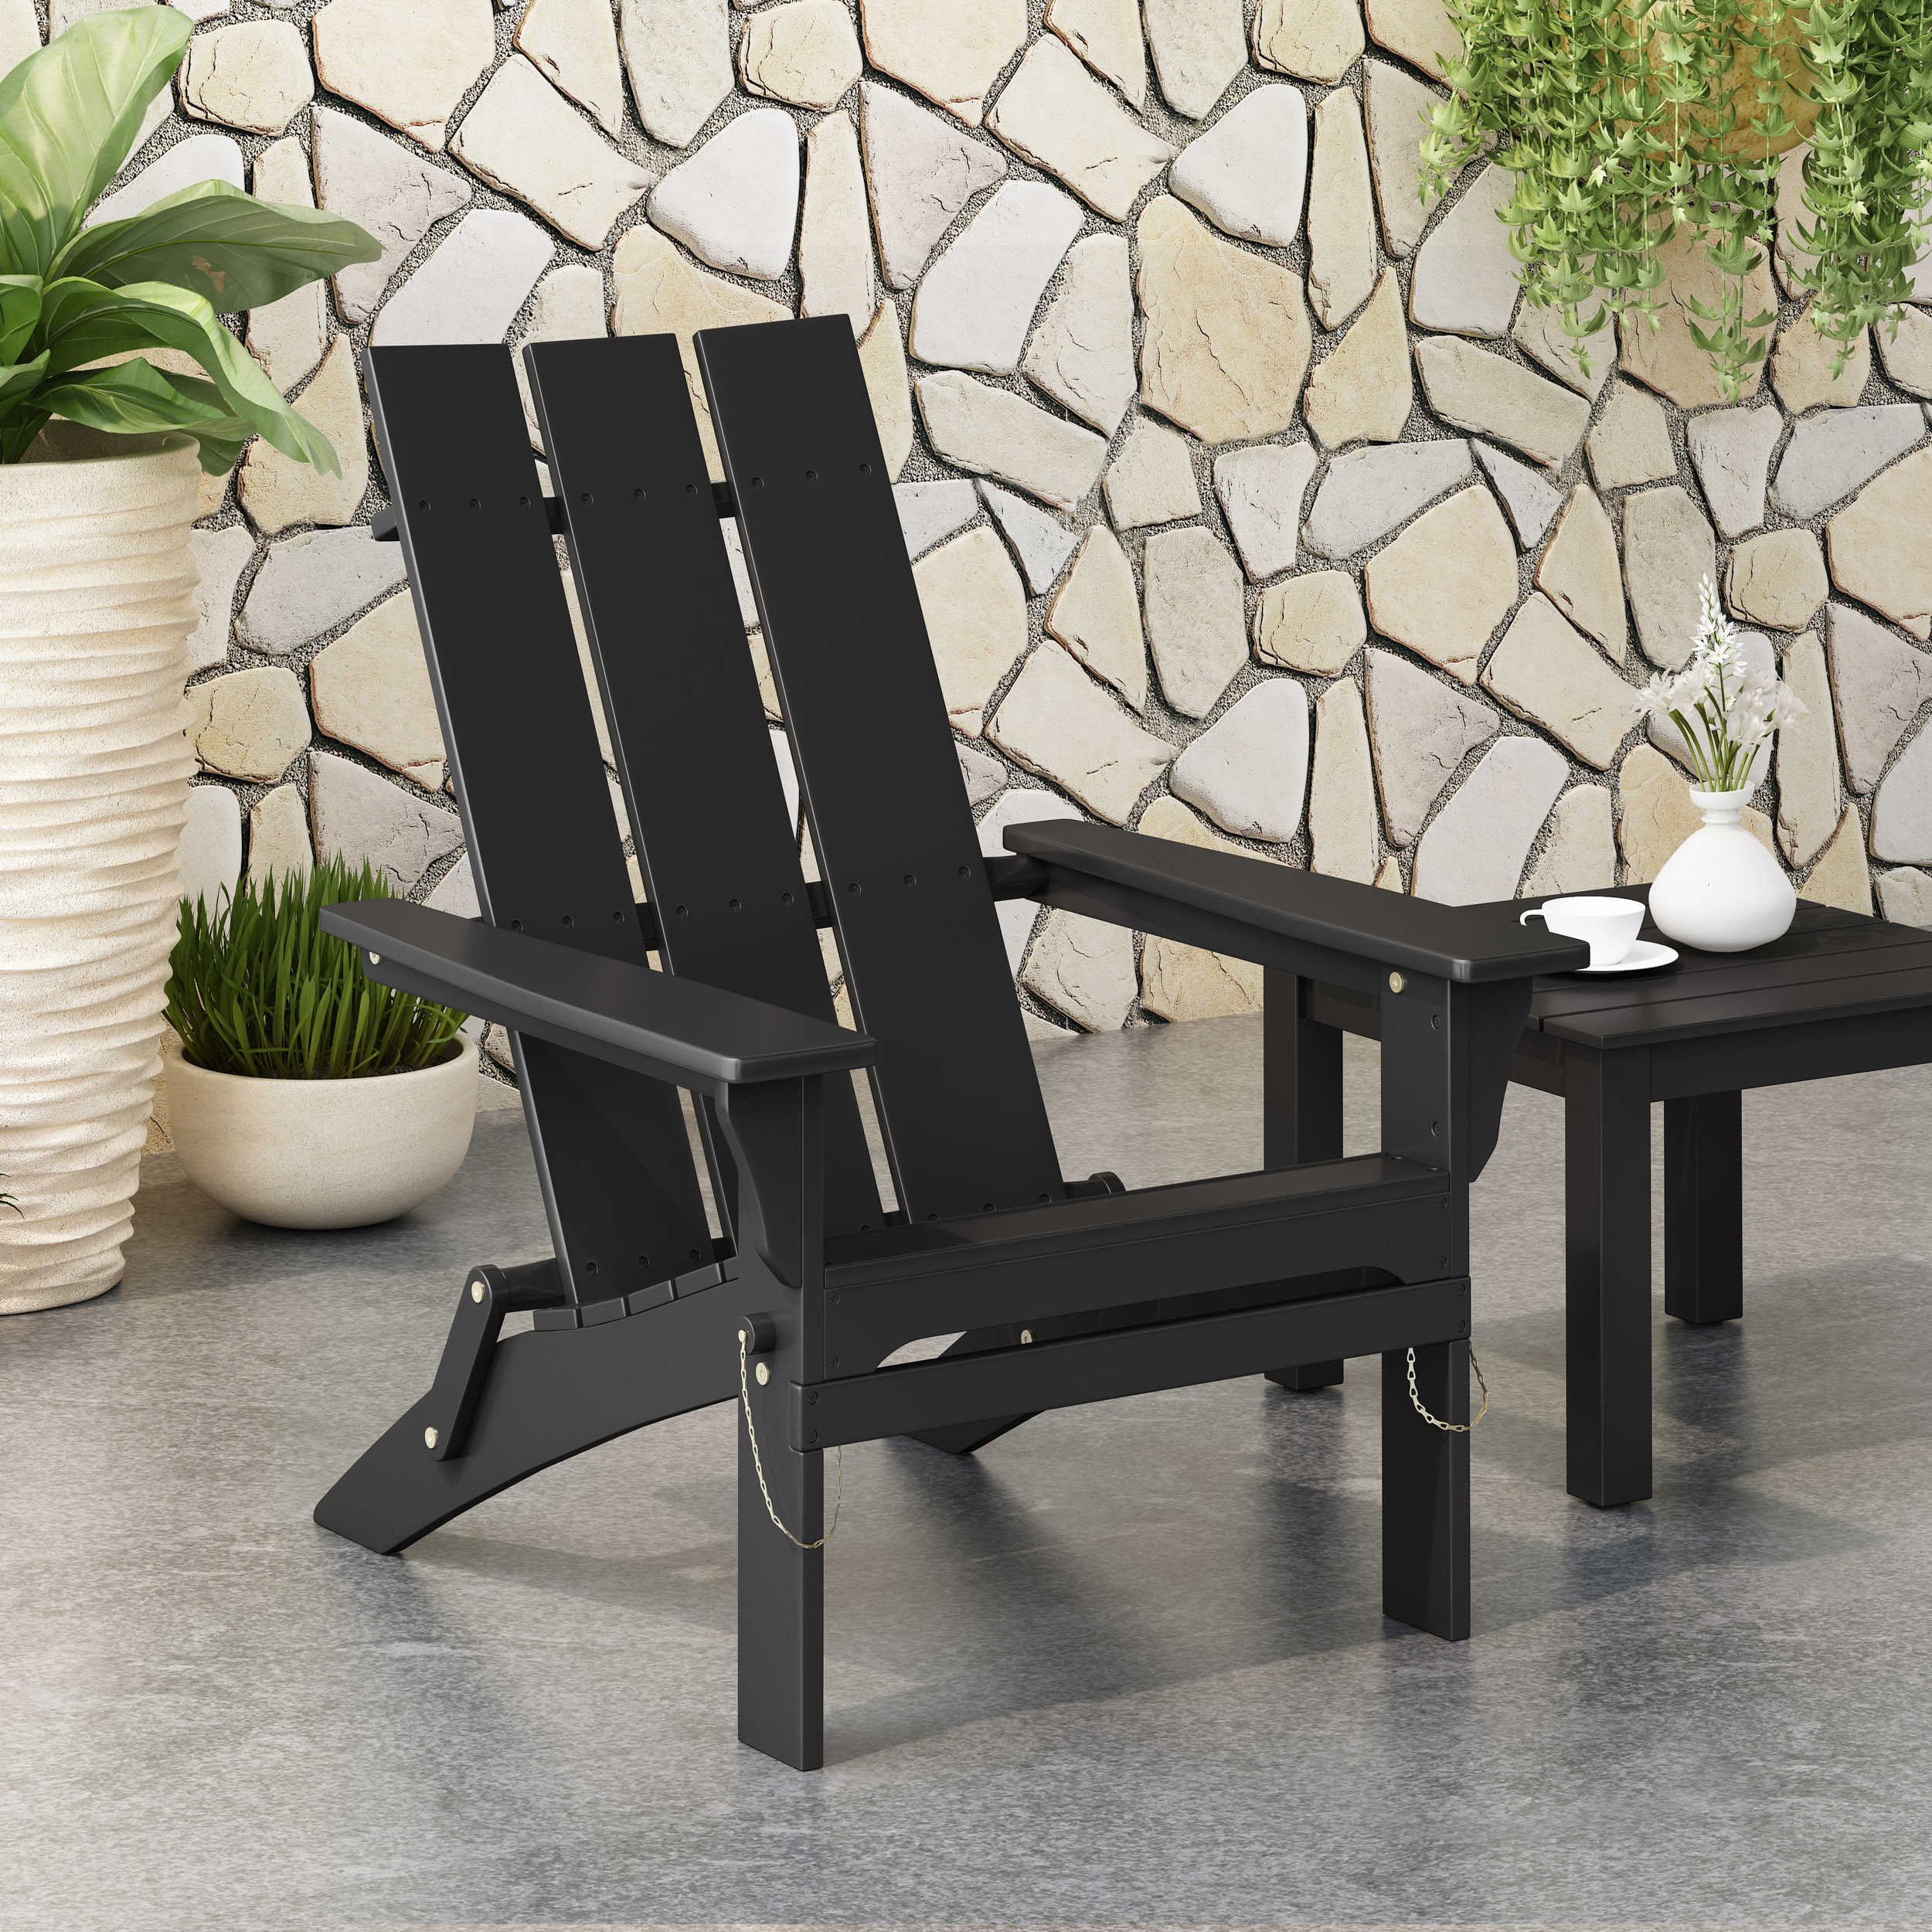 KUIKUI Outdoor Classic Pure Black Solid Wood Adirondack Chair Garden Lounge Chair Foldable - image 2 of 7